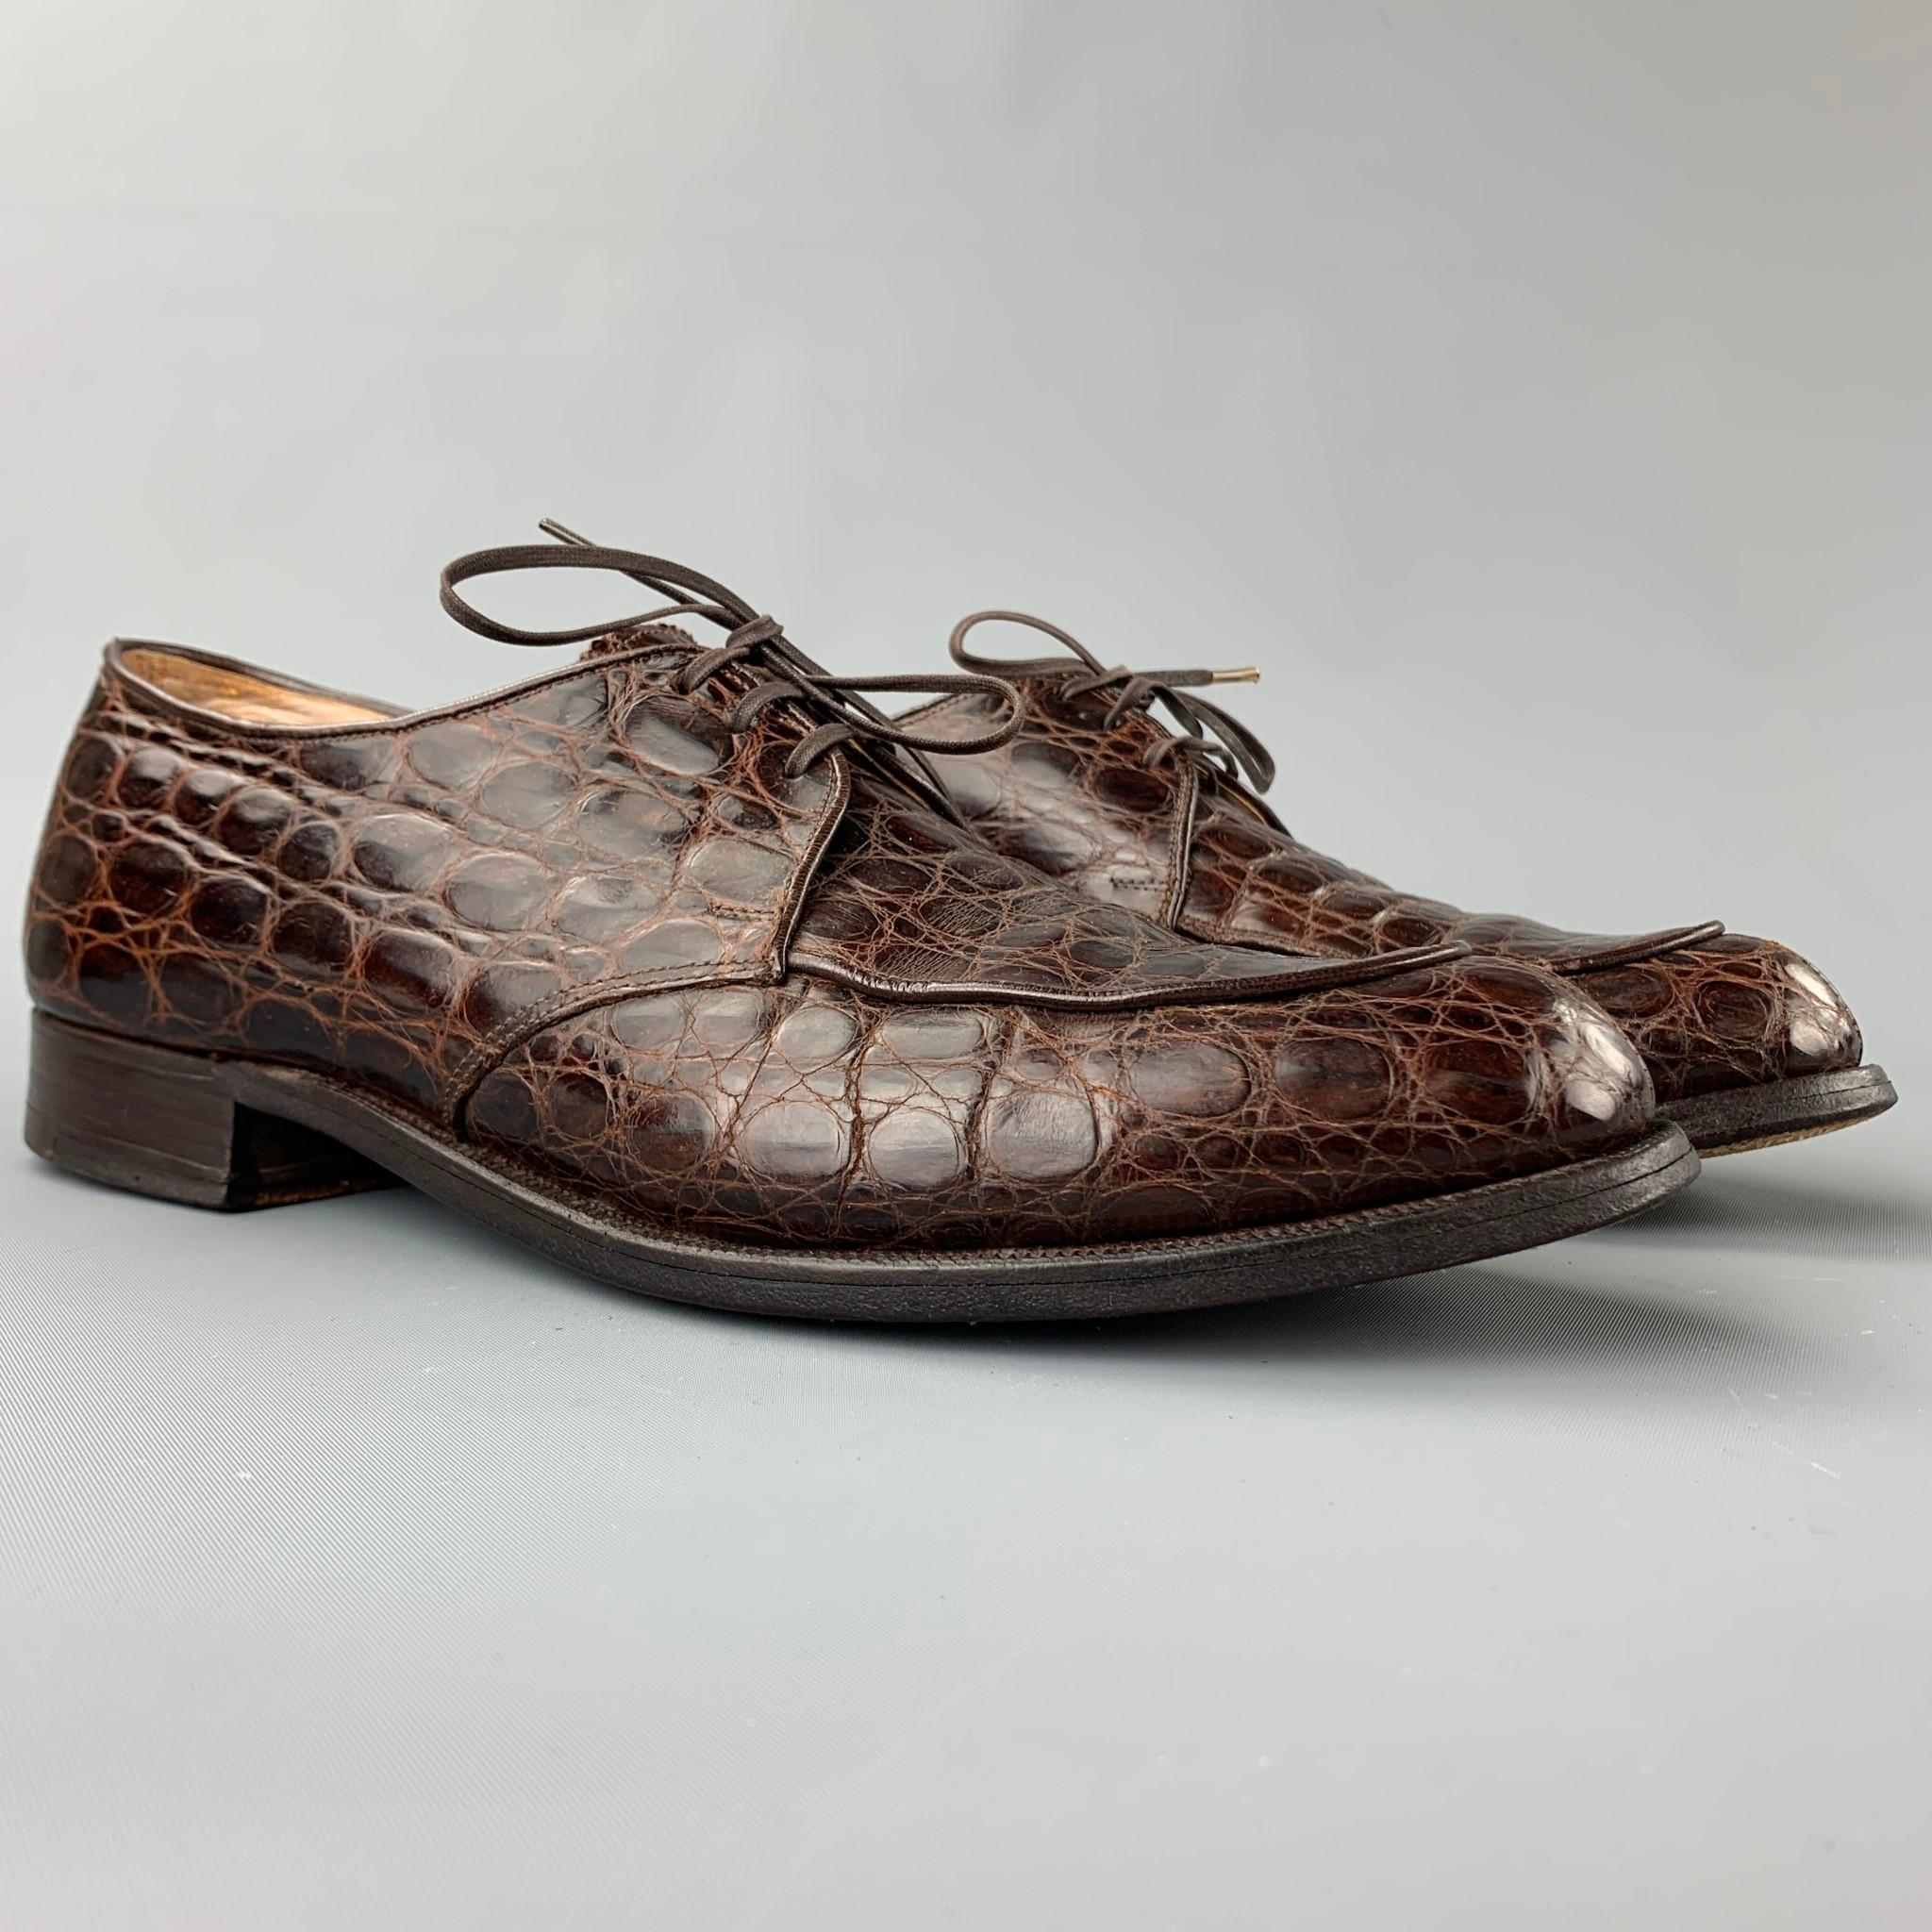 NETTLETON shoes comes in a brown embossed leather featuring a cap toe, top stitching, wooden sole, and a lace up closure. Moderate wear.

Good Pre-Owned Condition.
Marked: 9 B/D

Outsole: 

11.5 in. x 4 in. 